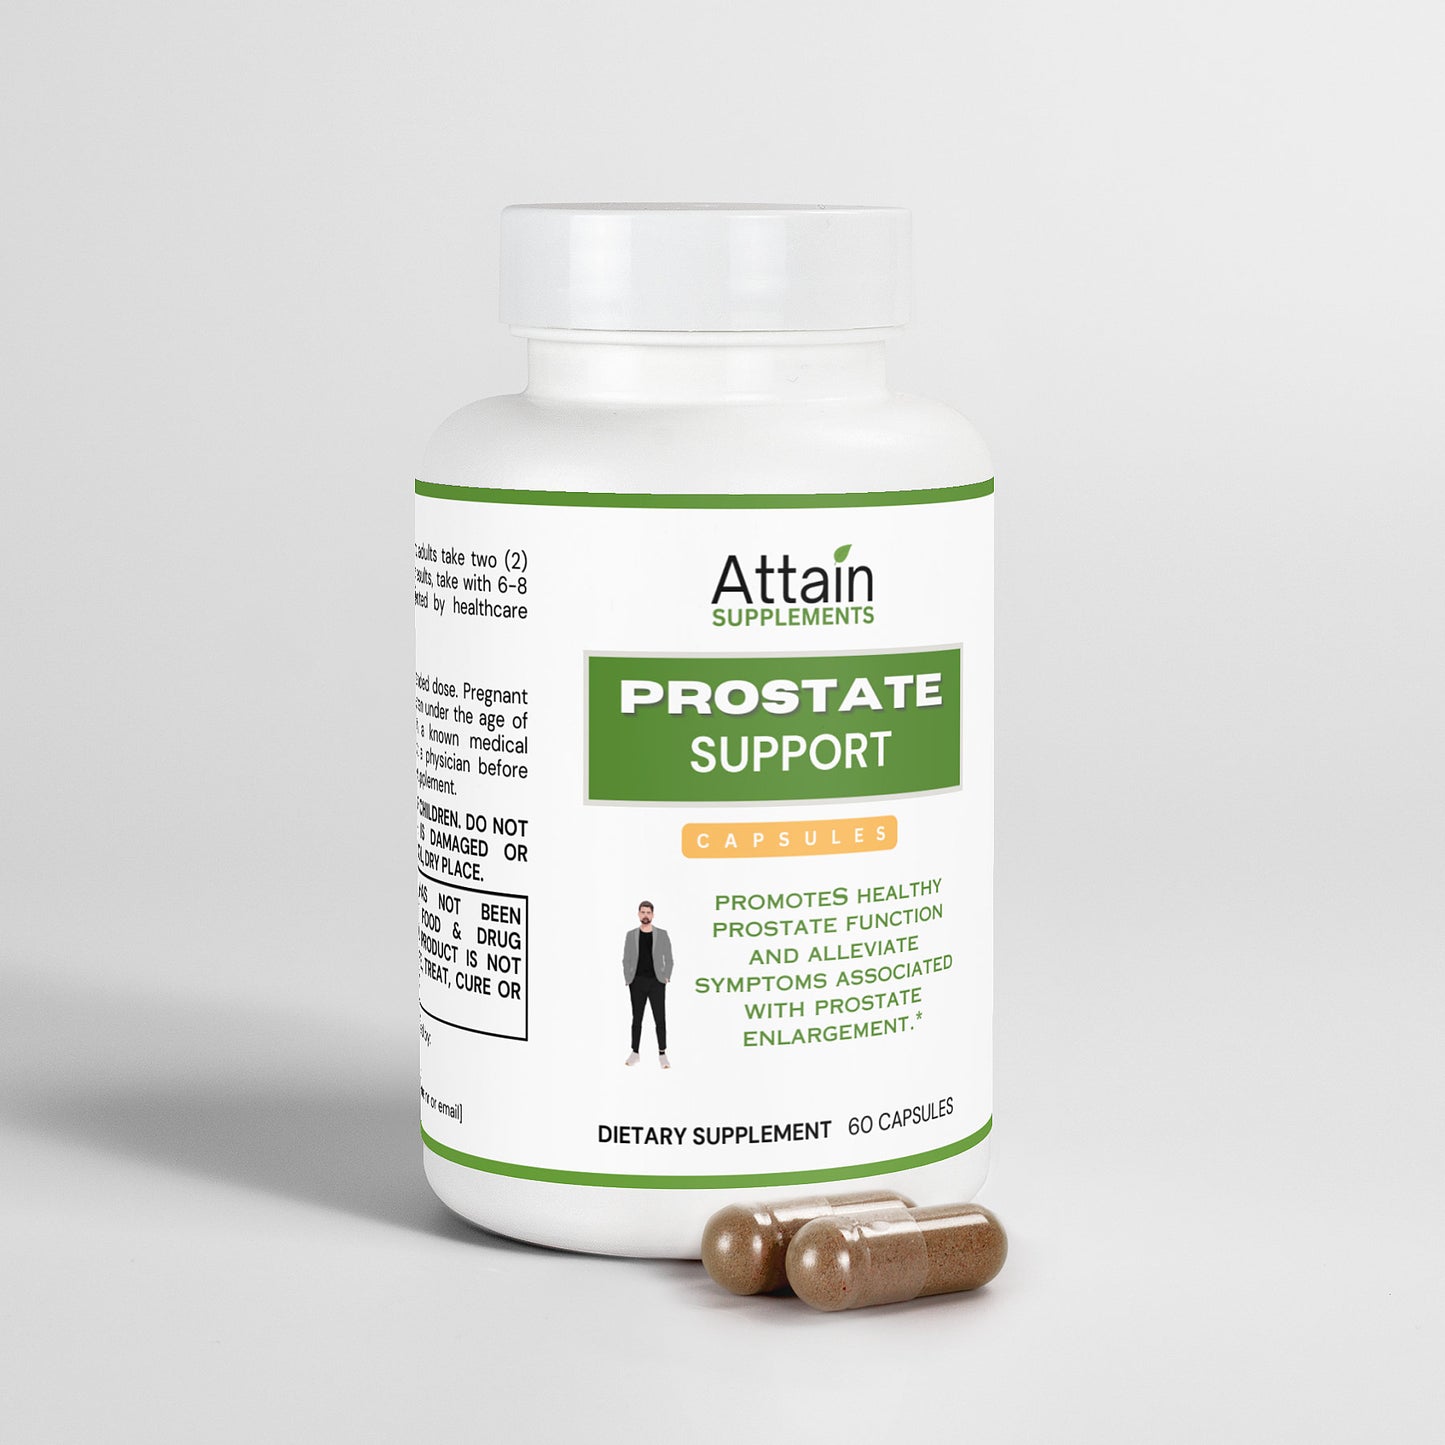 Prostate Support Capsules - Attain Supplements